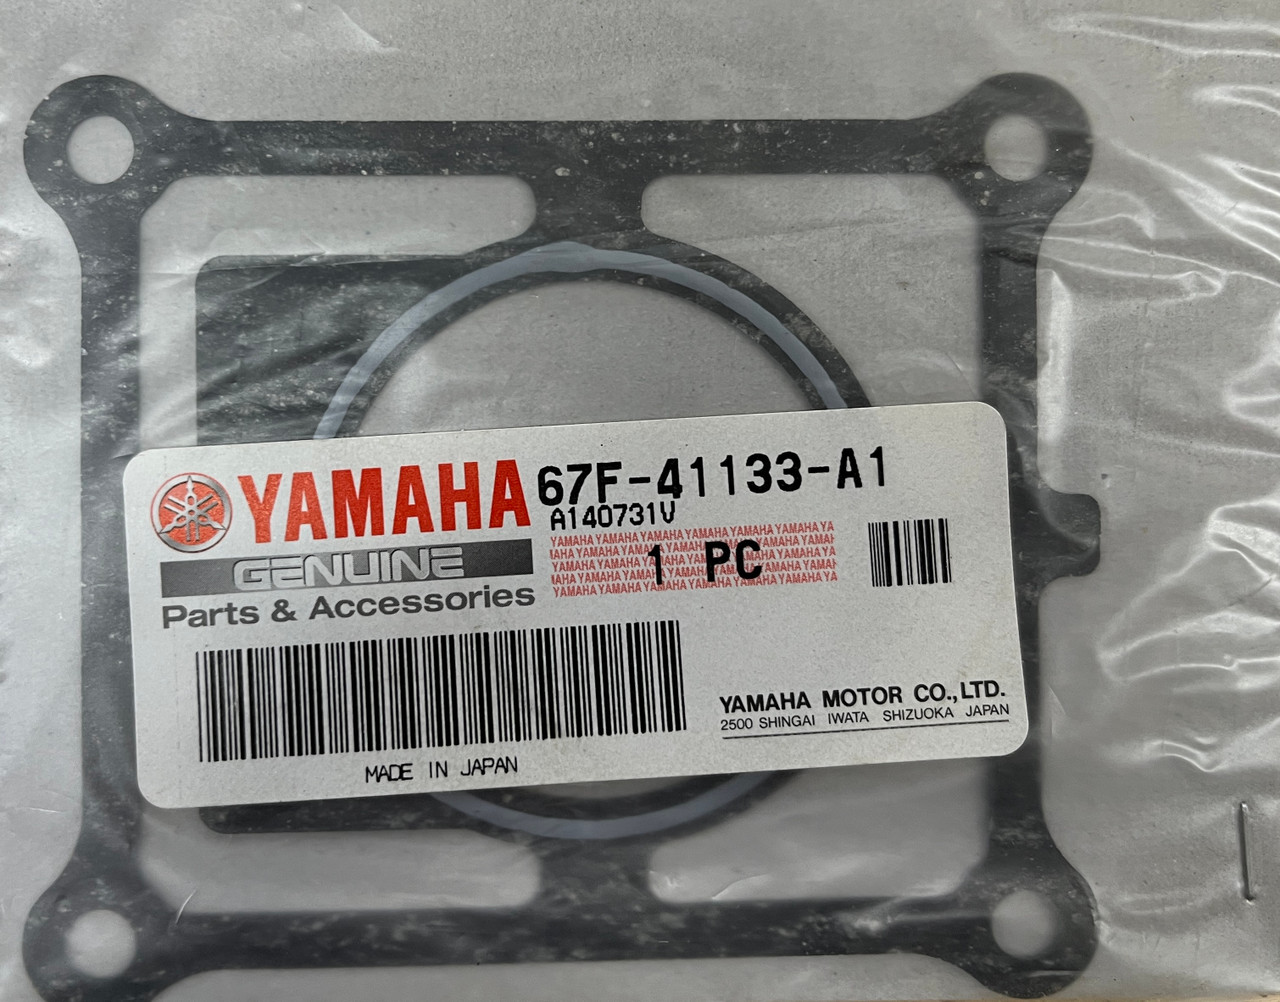 $10.99* GENUINE YAMAHA no tax* GASKET, EXHAUST 67F-41133-A1-00 *In Stock & Ready To Ship